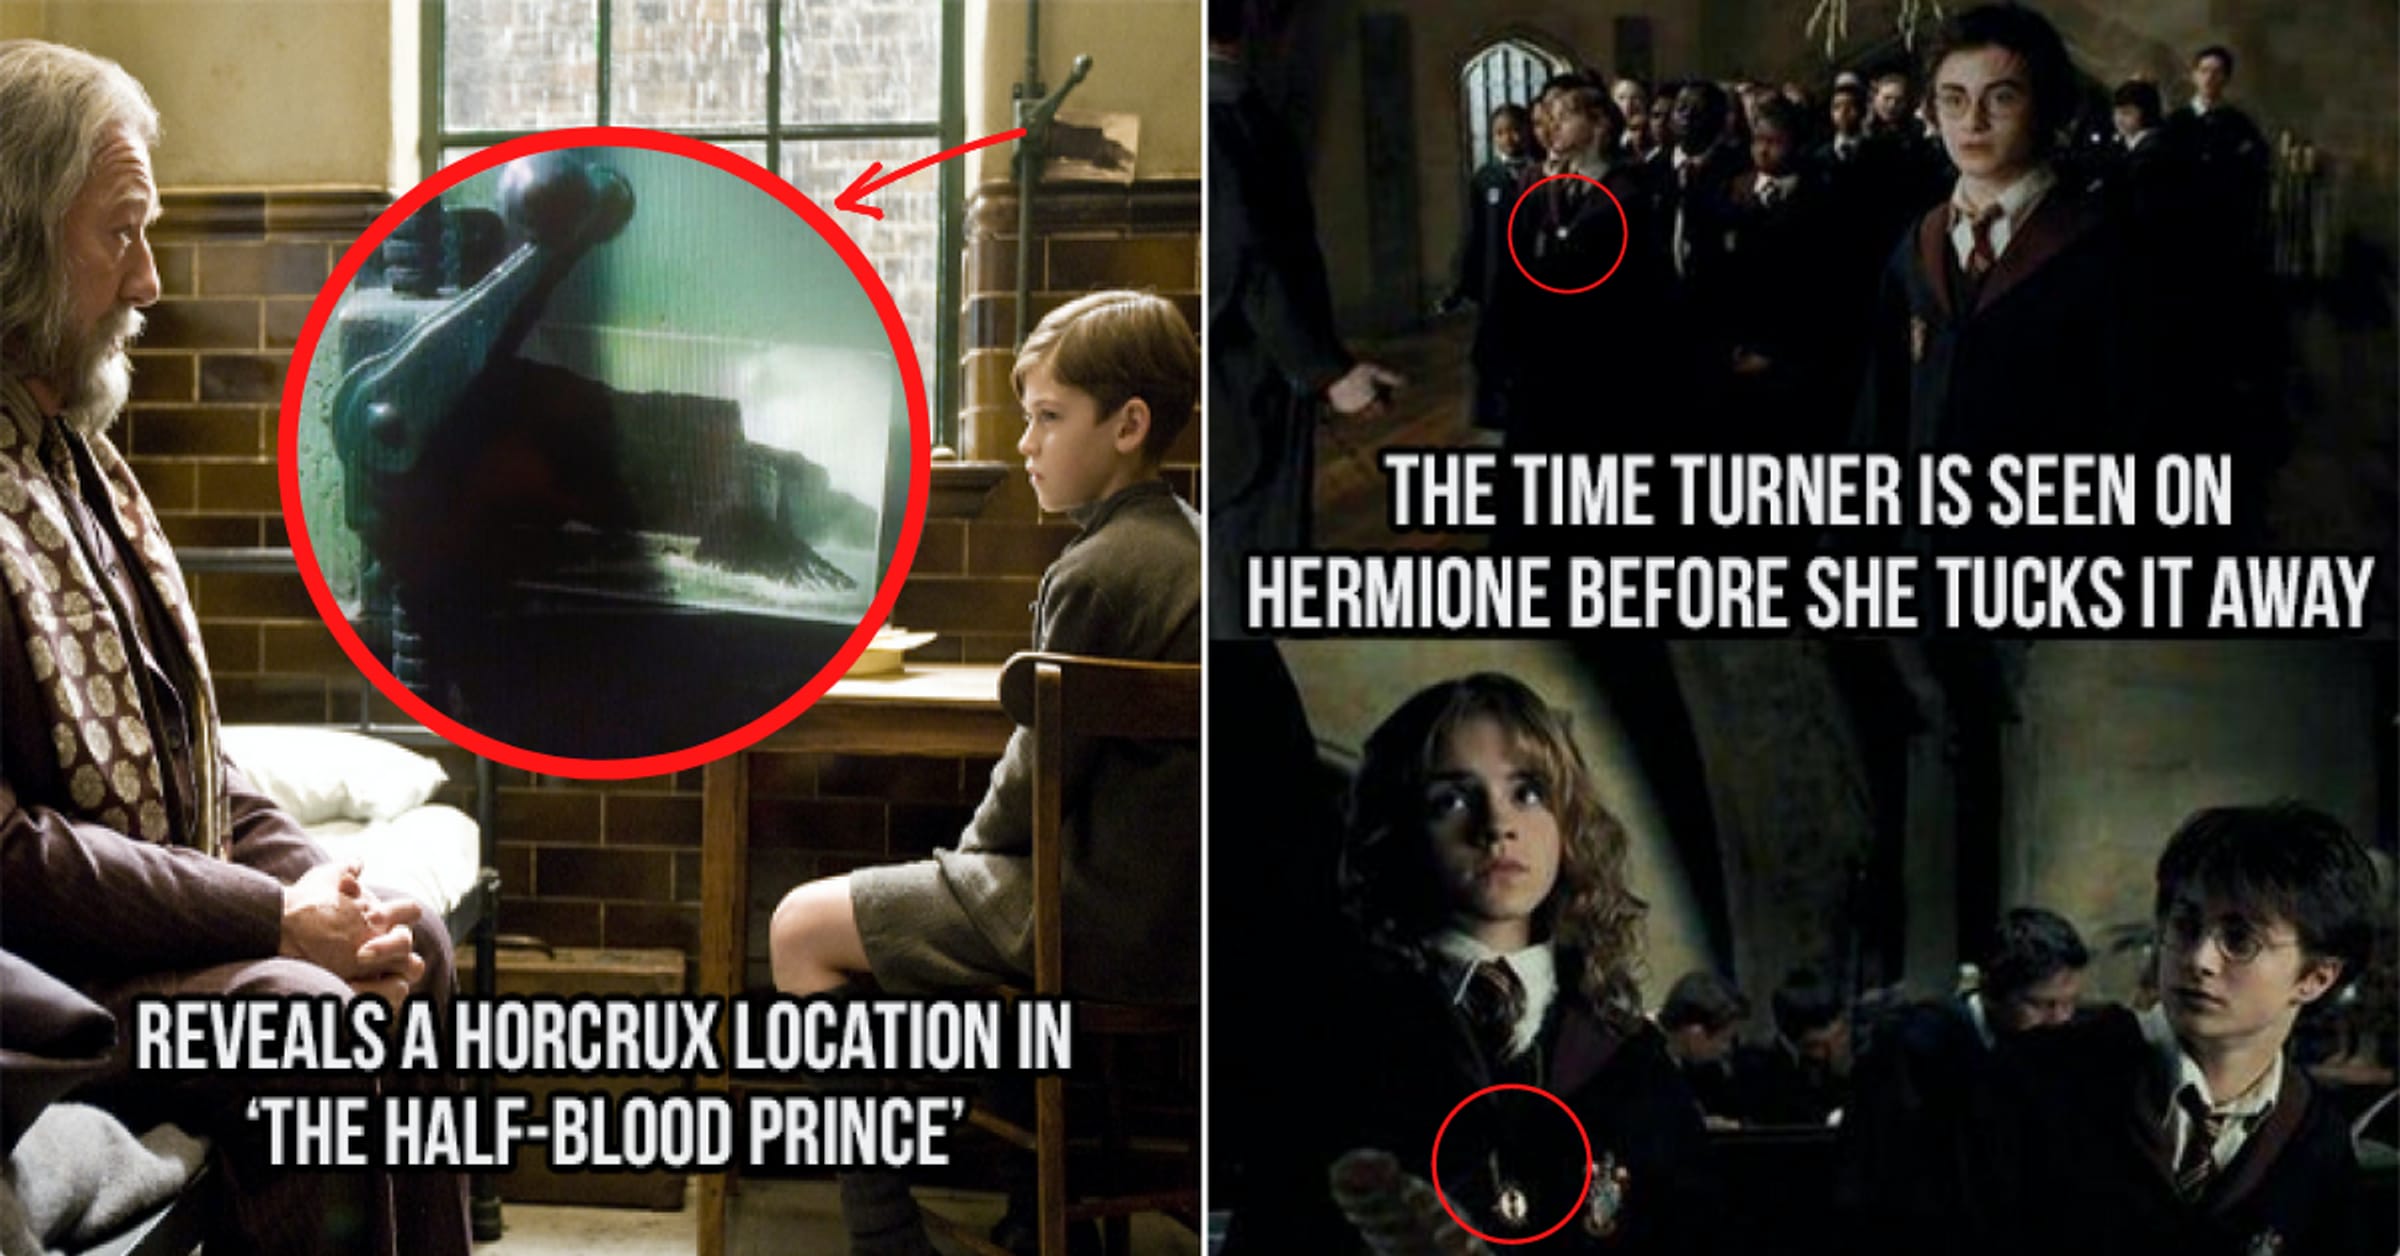 15 Foreshadowing Details In 'Harry Potter' To Look Out For On Your Next  Rewatch